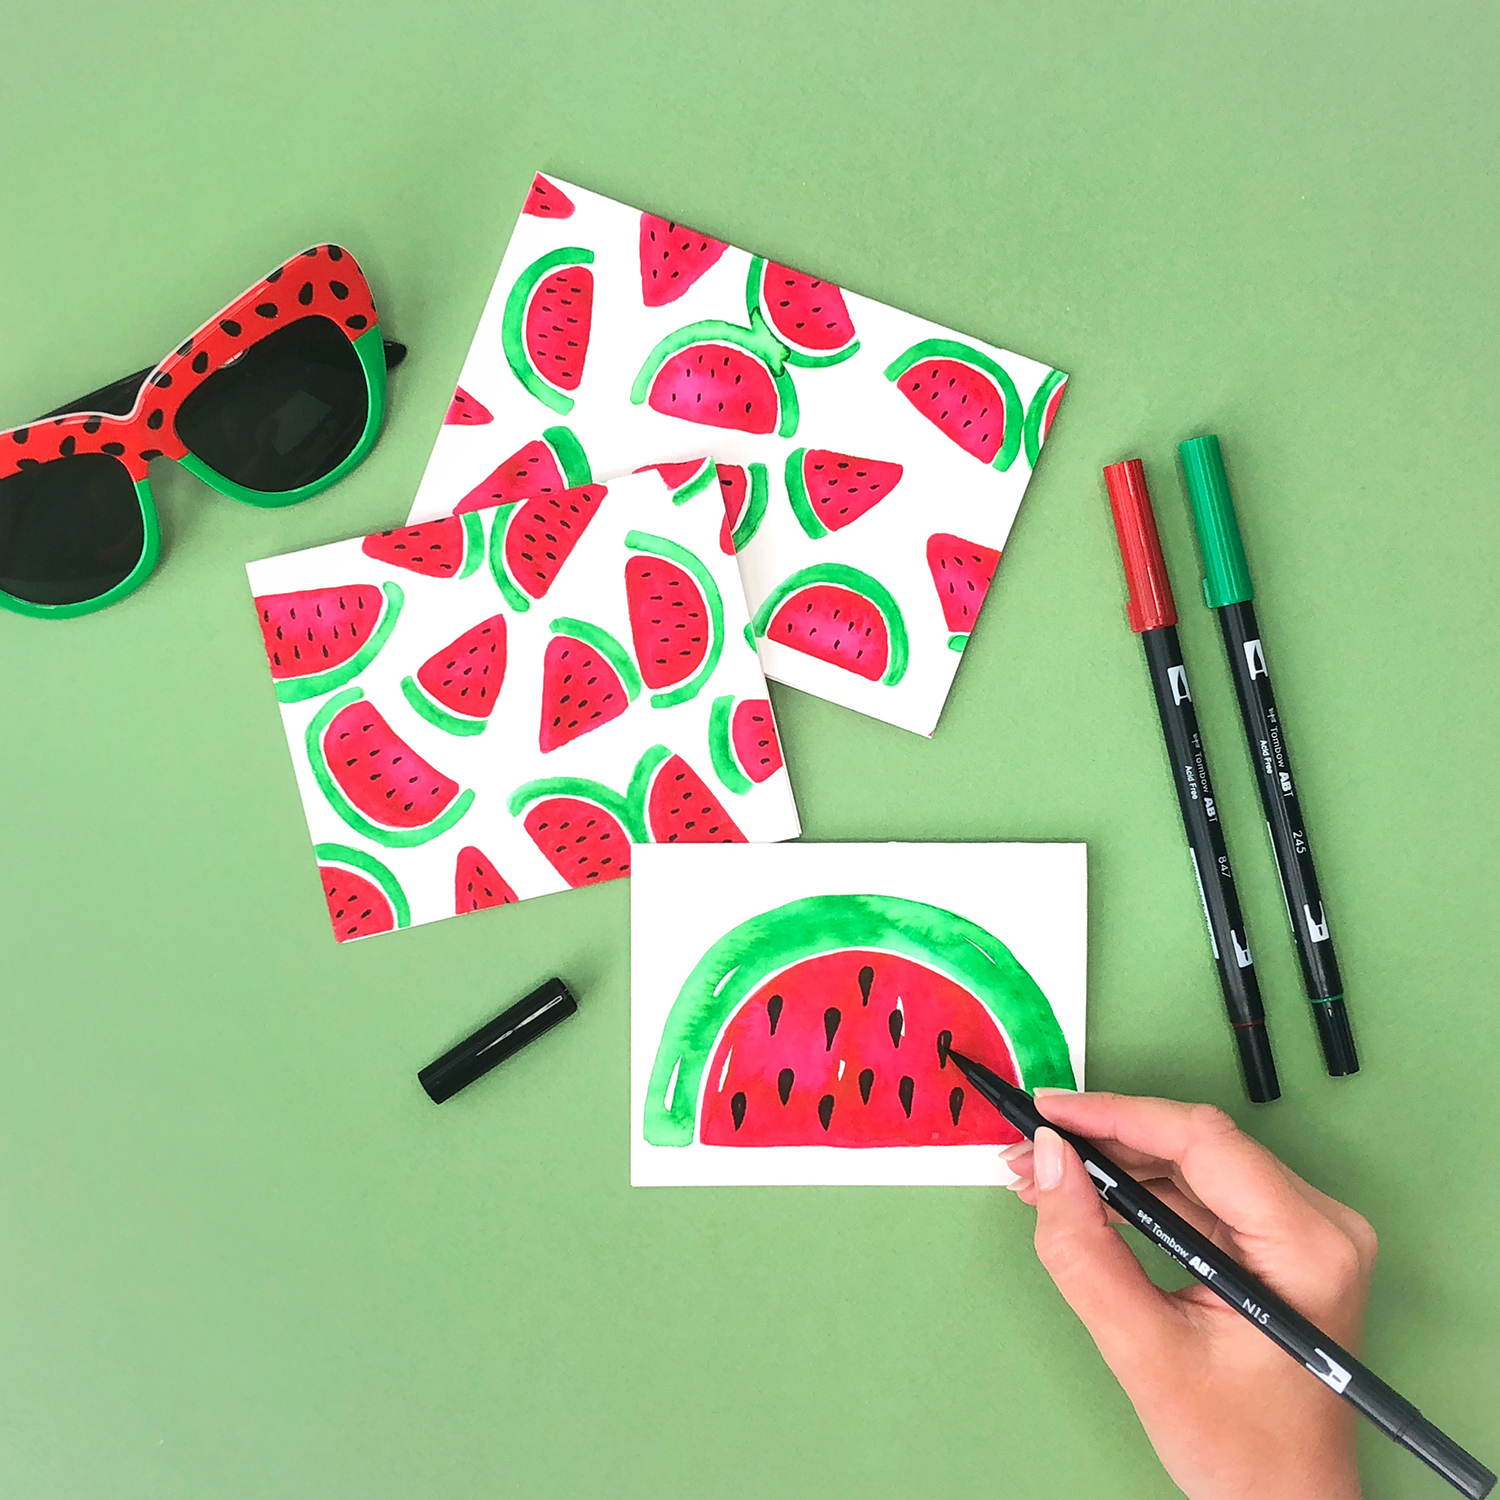 Watercolor Watermelon by Jessica Mack for Tombow